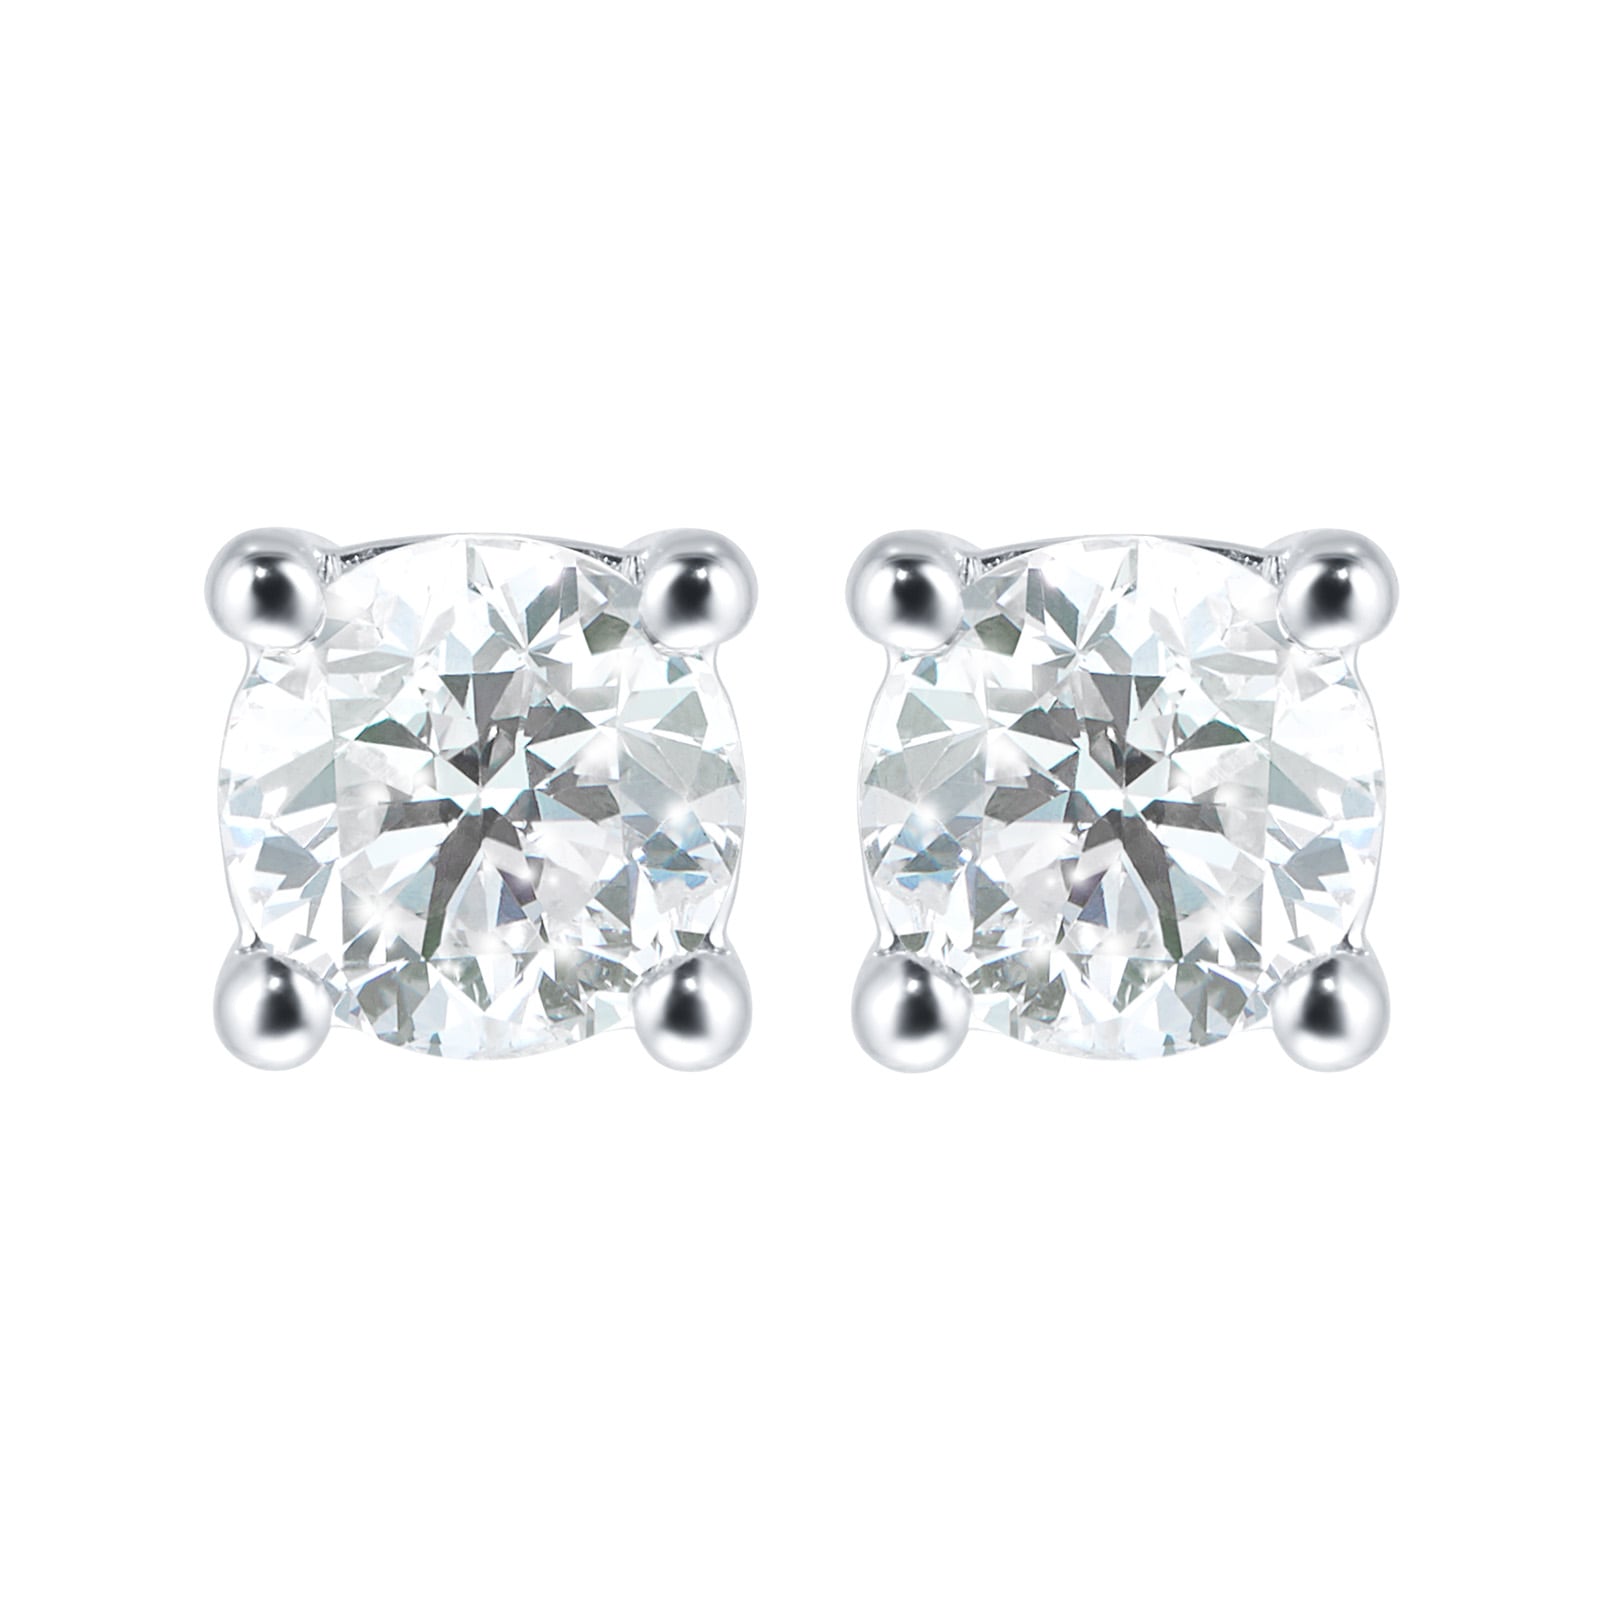 9ct White Gold 0.40ct 4 Claw Goldsmiths Brightest Diamond Earrings